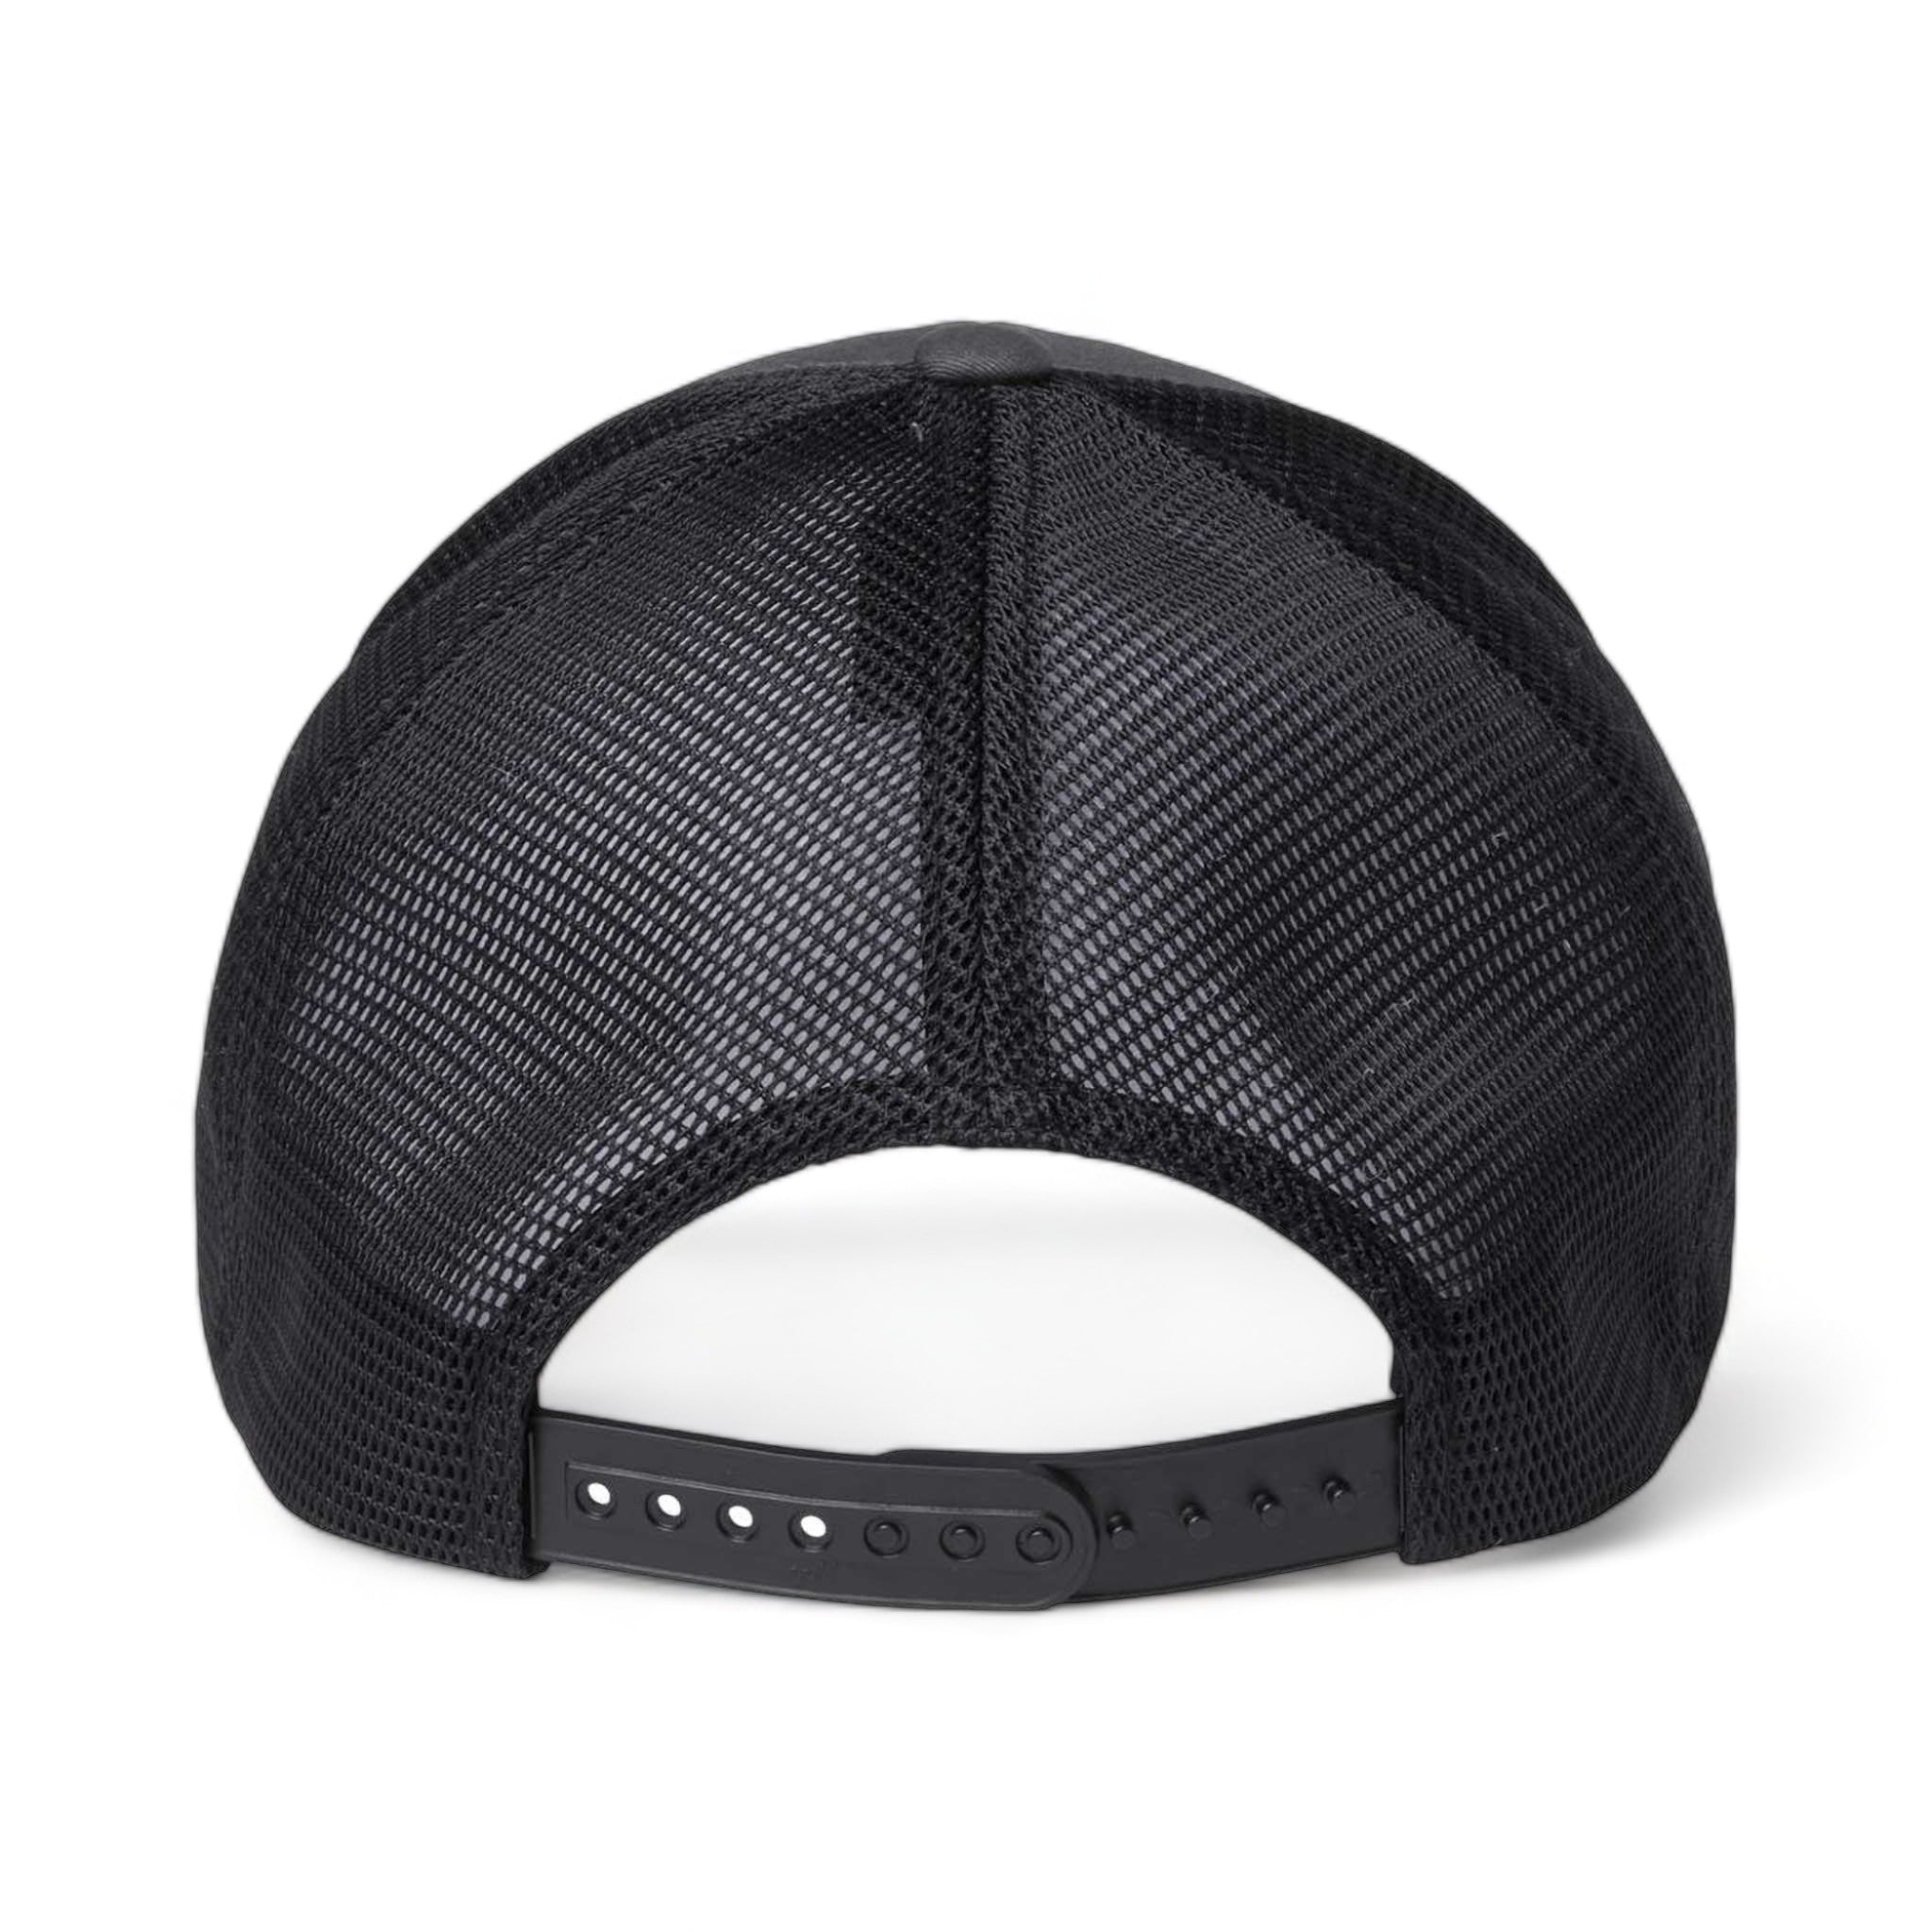 Back view of Flexfit 110M custom hat in charcoal and black